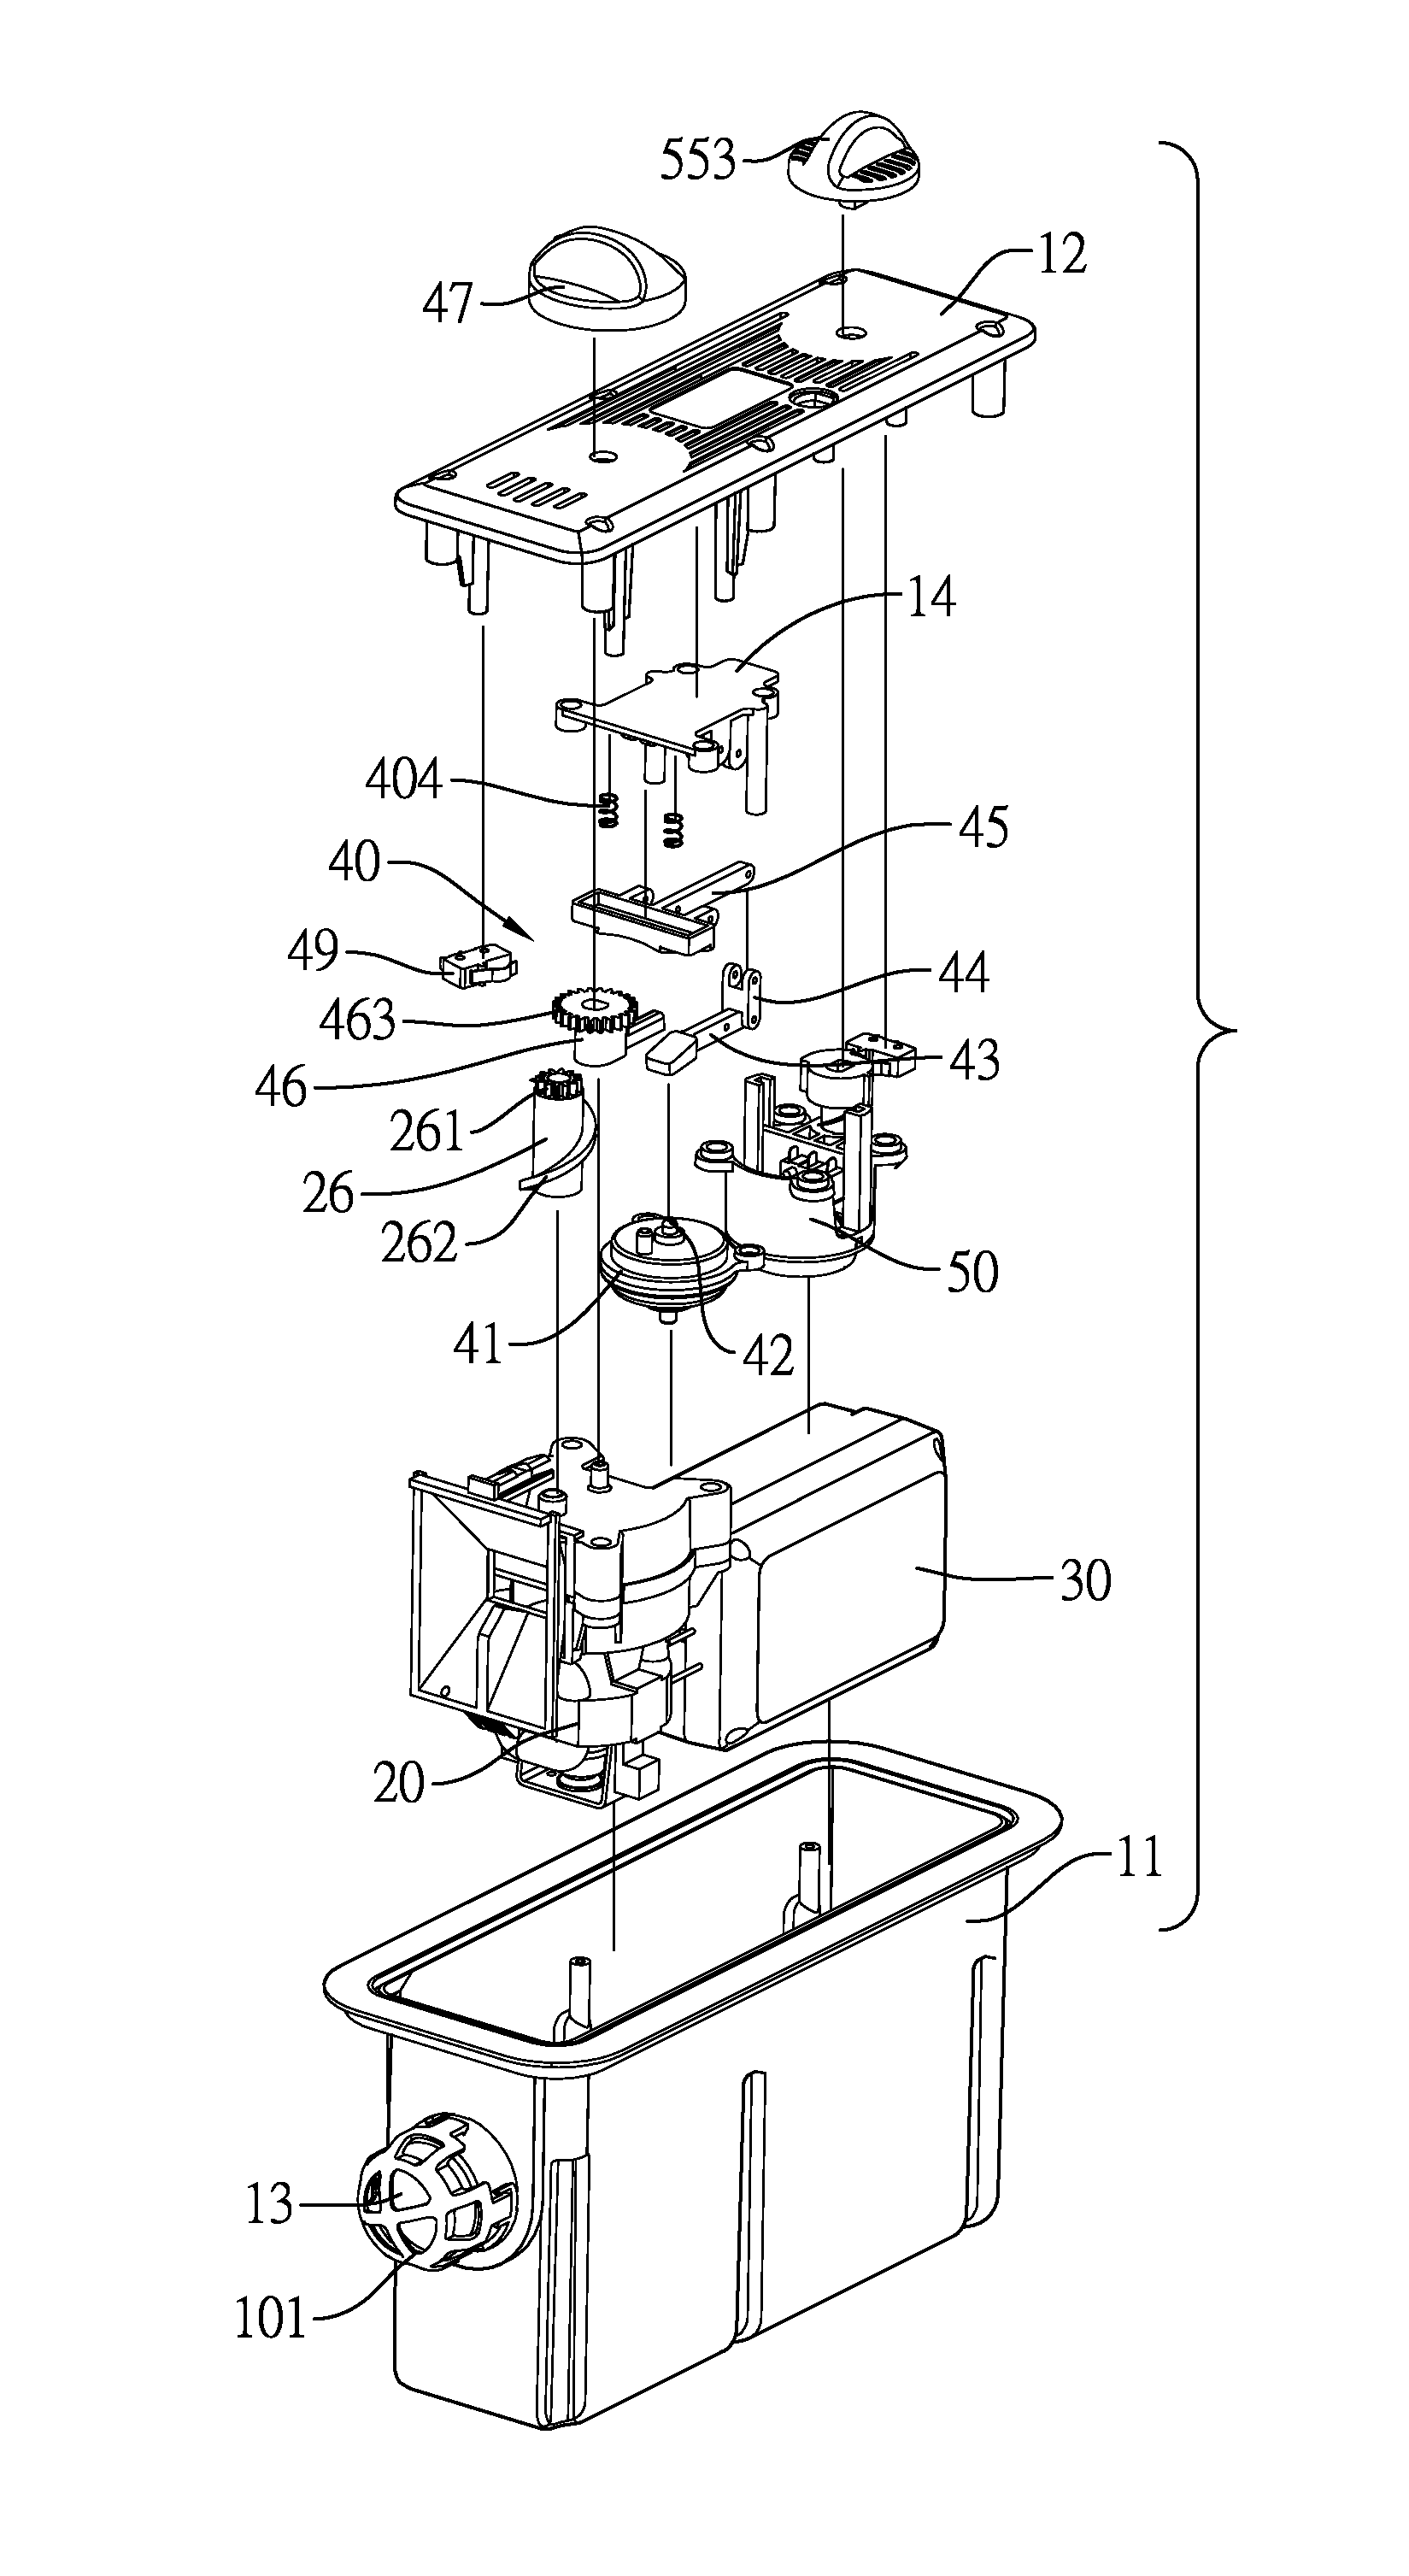 Air pump with internal automatic controller